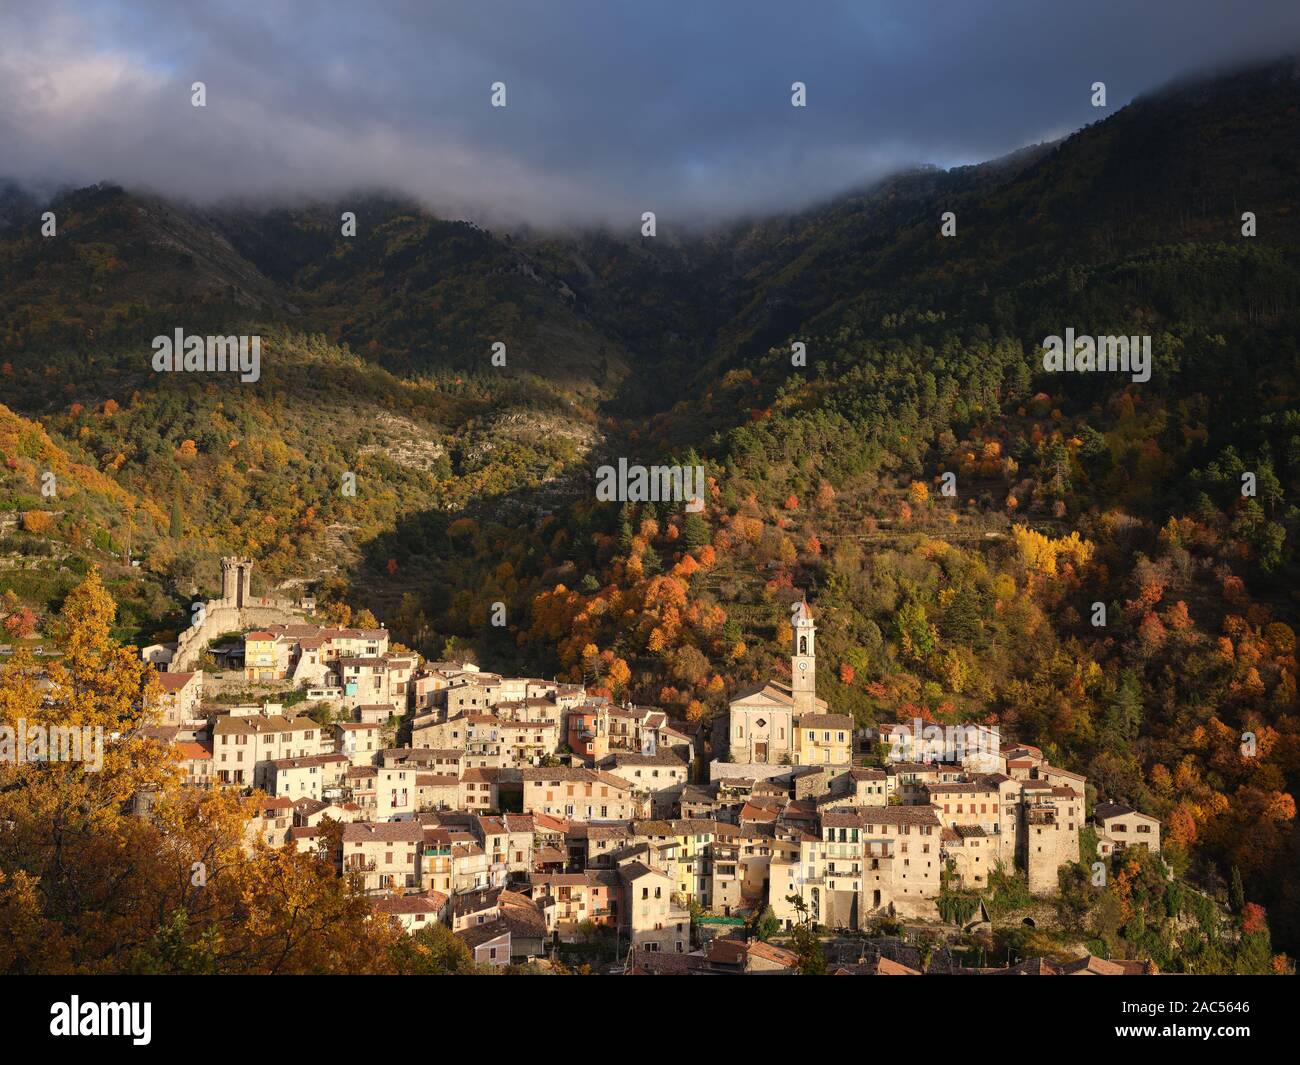 Glowing light of the setting sun on a remote medieval village in the Southern Alps. Lucéram, Alpes-Maritimes, France. Stock Photo